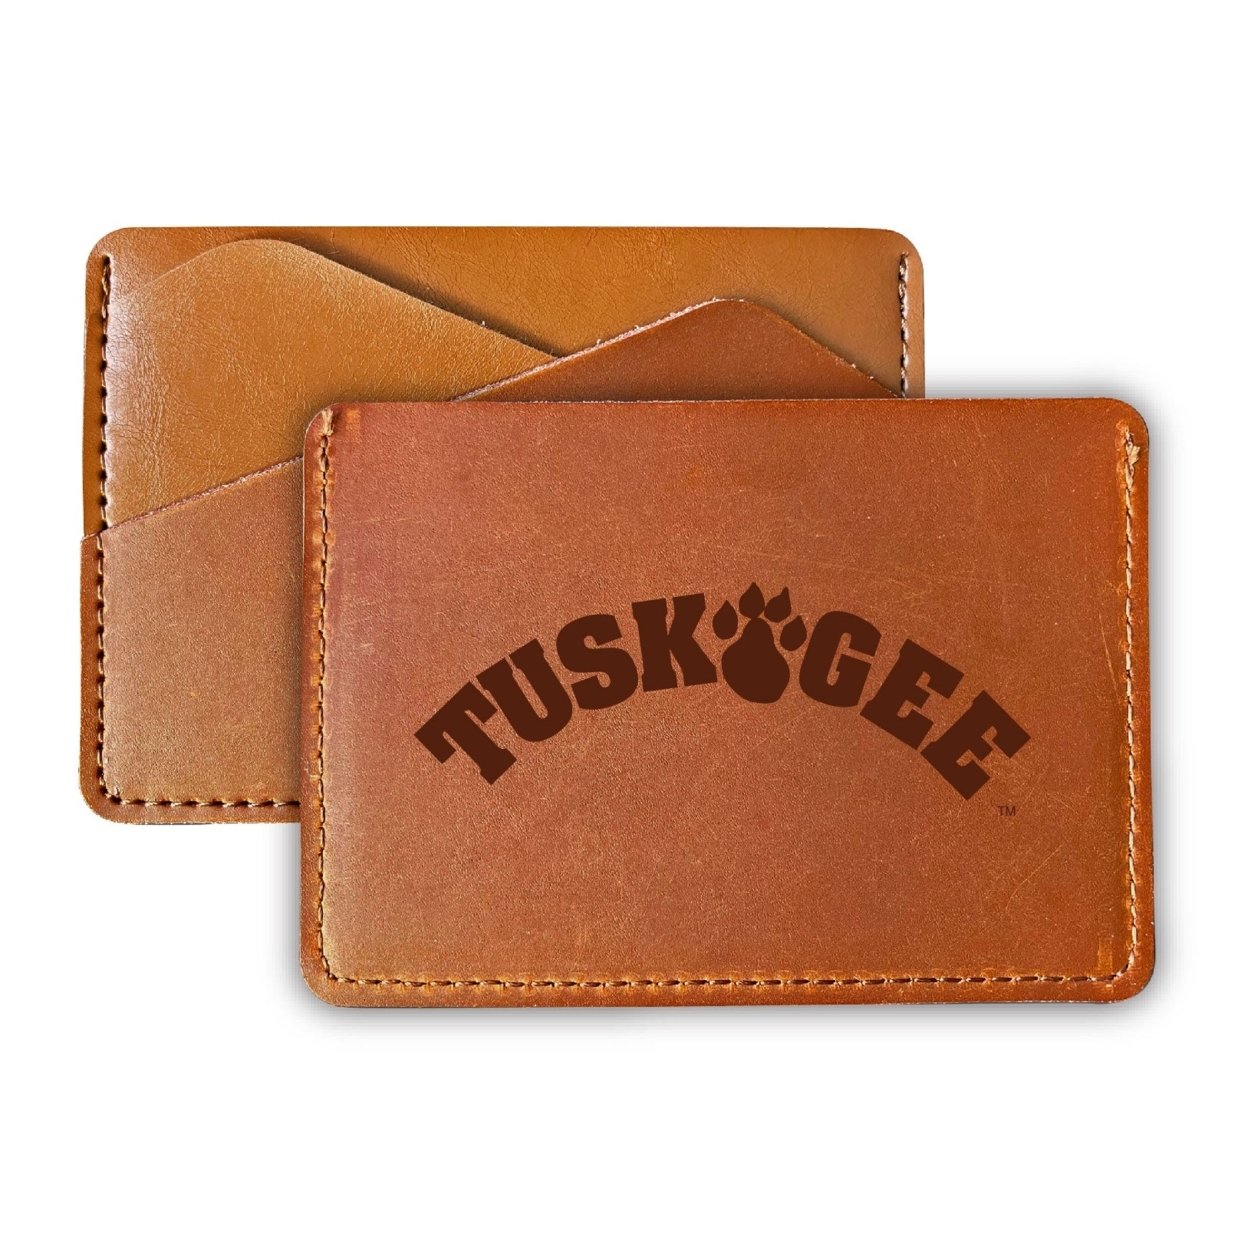 Tuskegee University College Leather Card Holder Wallet